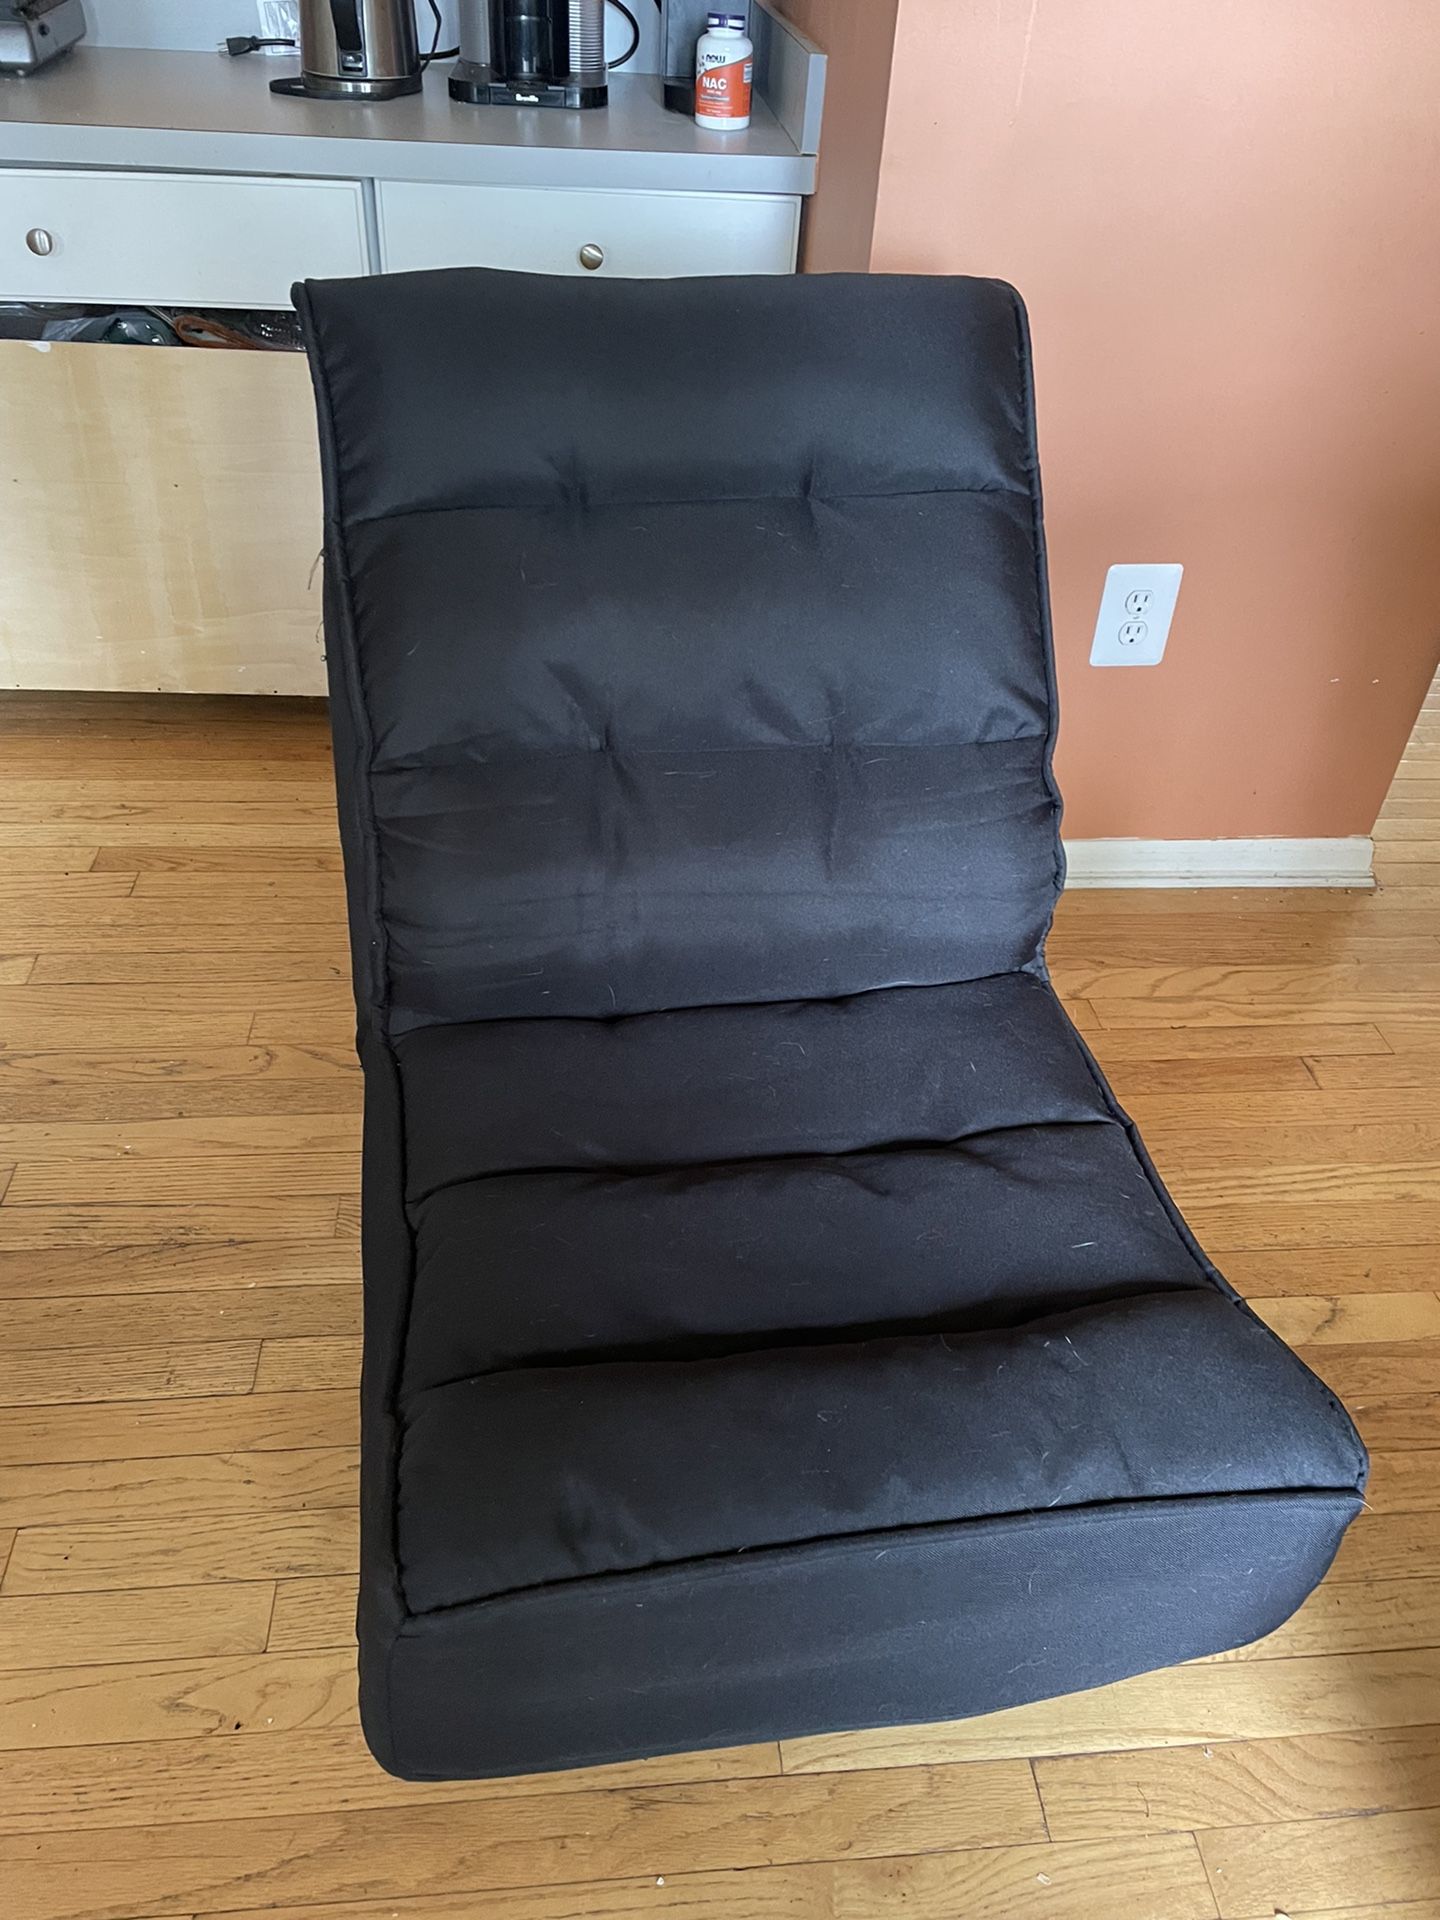 Foldable Swival Theater Cushioned Black Game Chair 